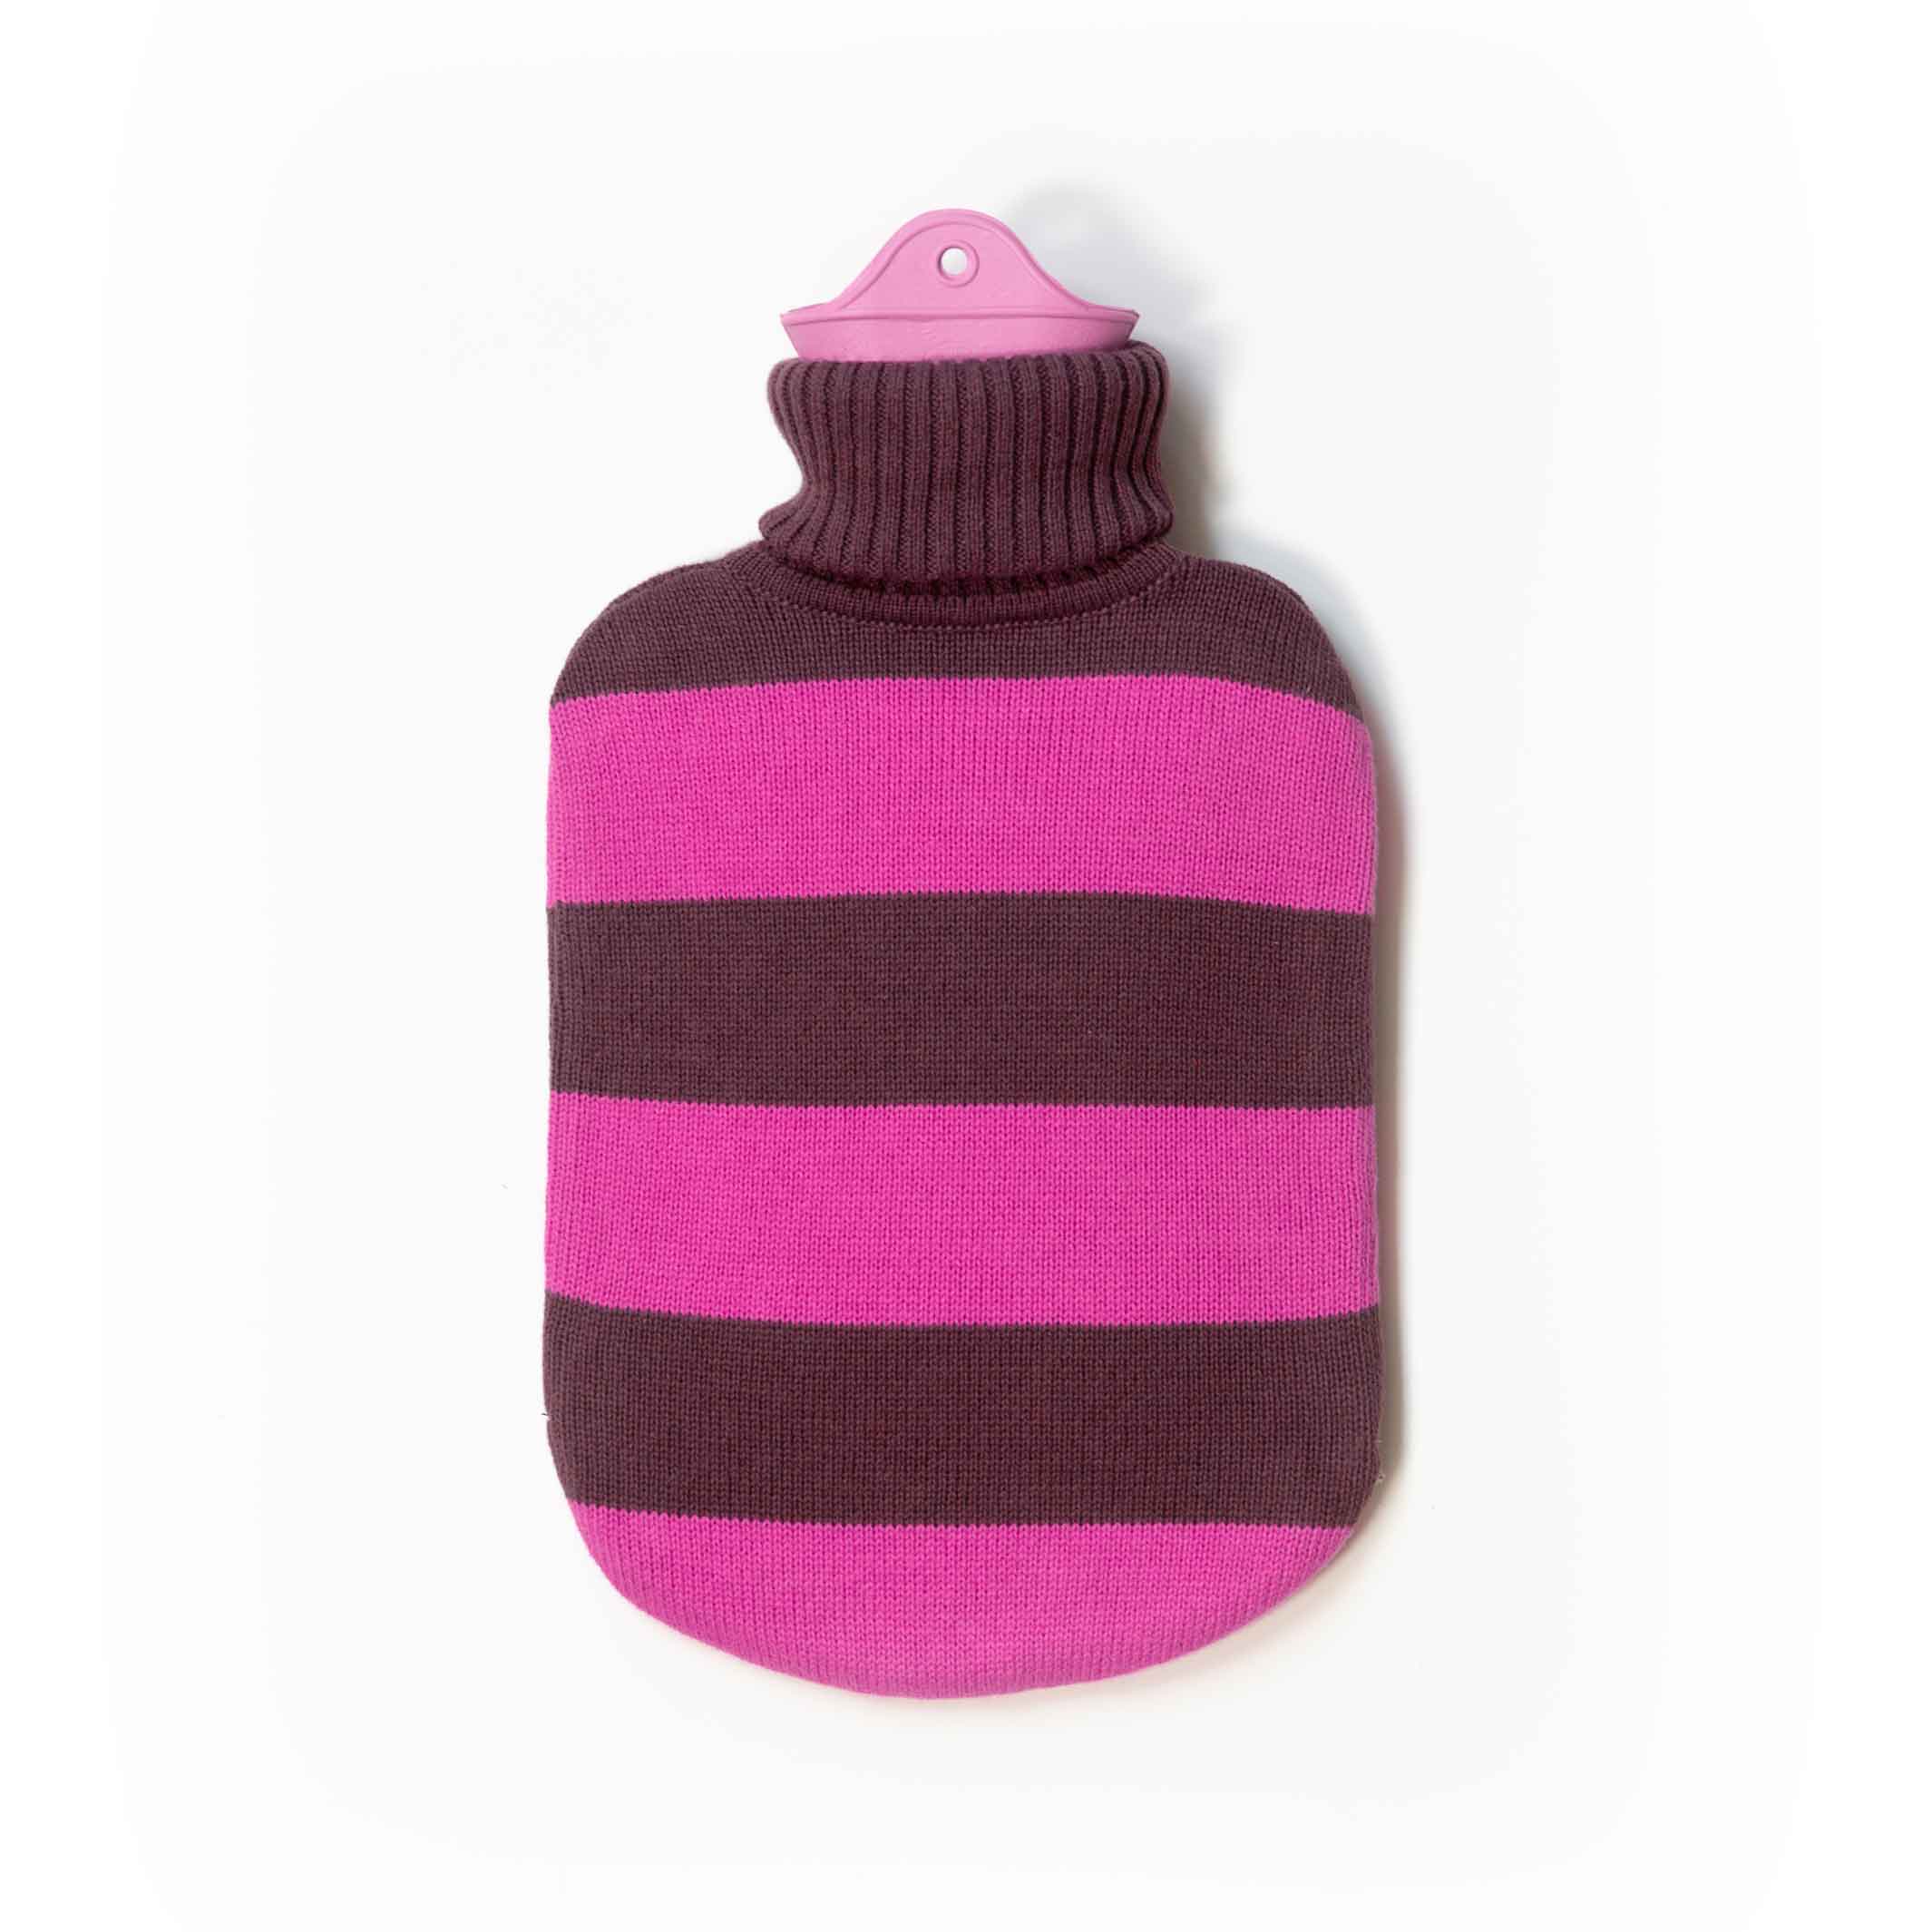 HOT WATER BOTTLE with turtleneck | Pink & Plum Green | Suite702